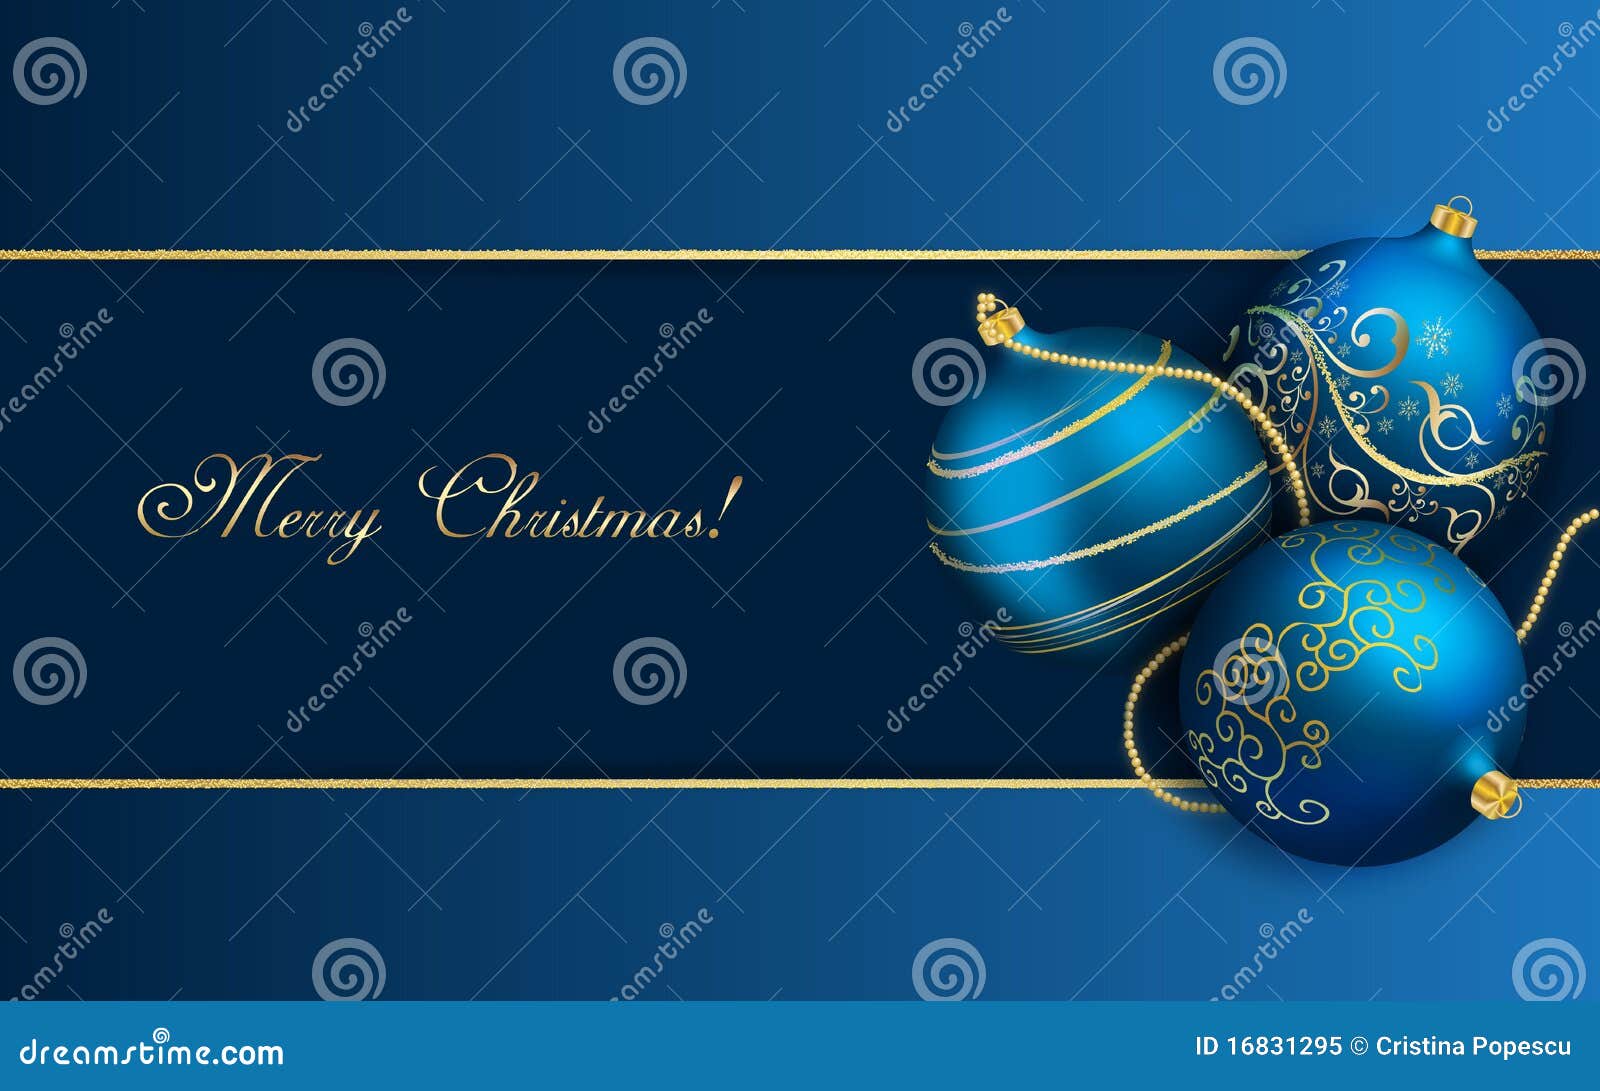 HD wallpaper Merry Christmas Holiday Blue Backgro blue Christmas bauble  decor  Wallpaper Flare